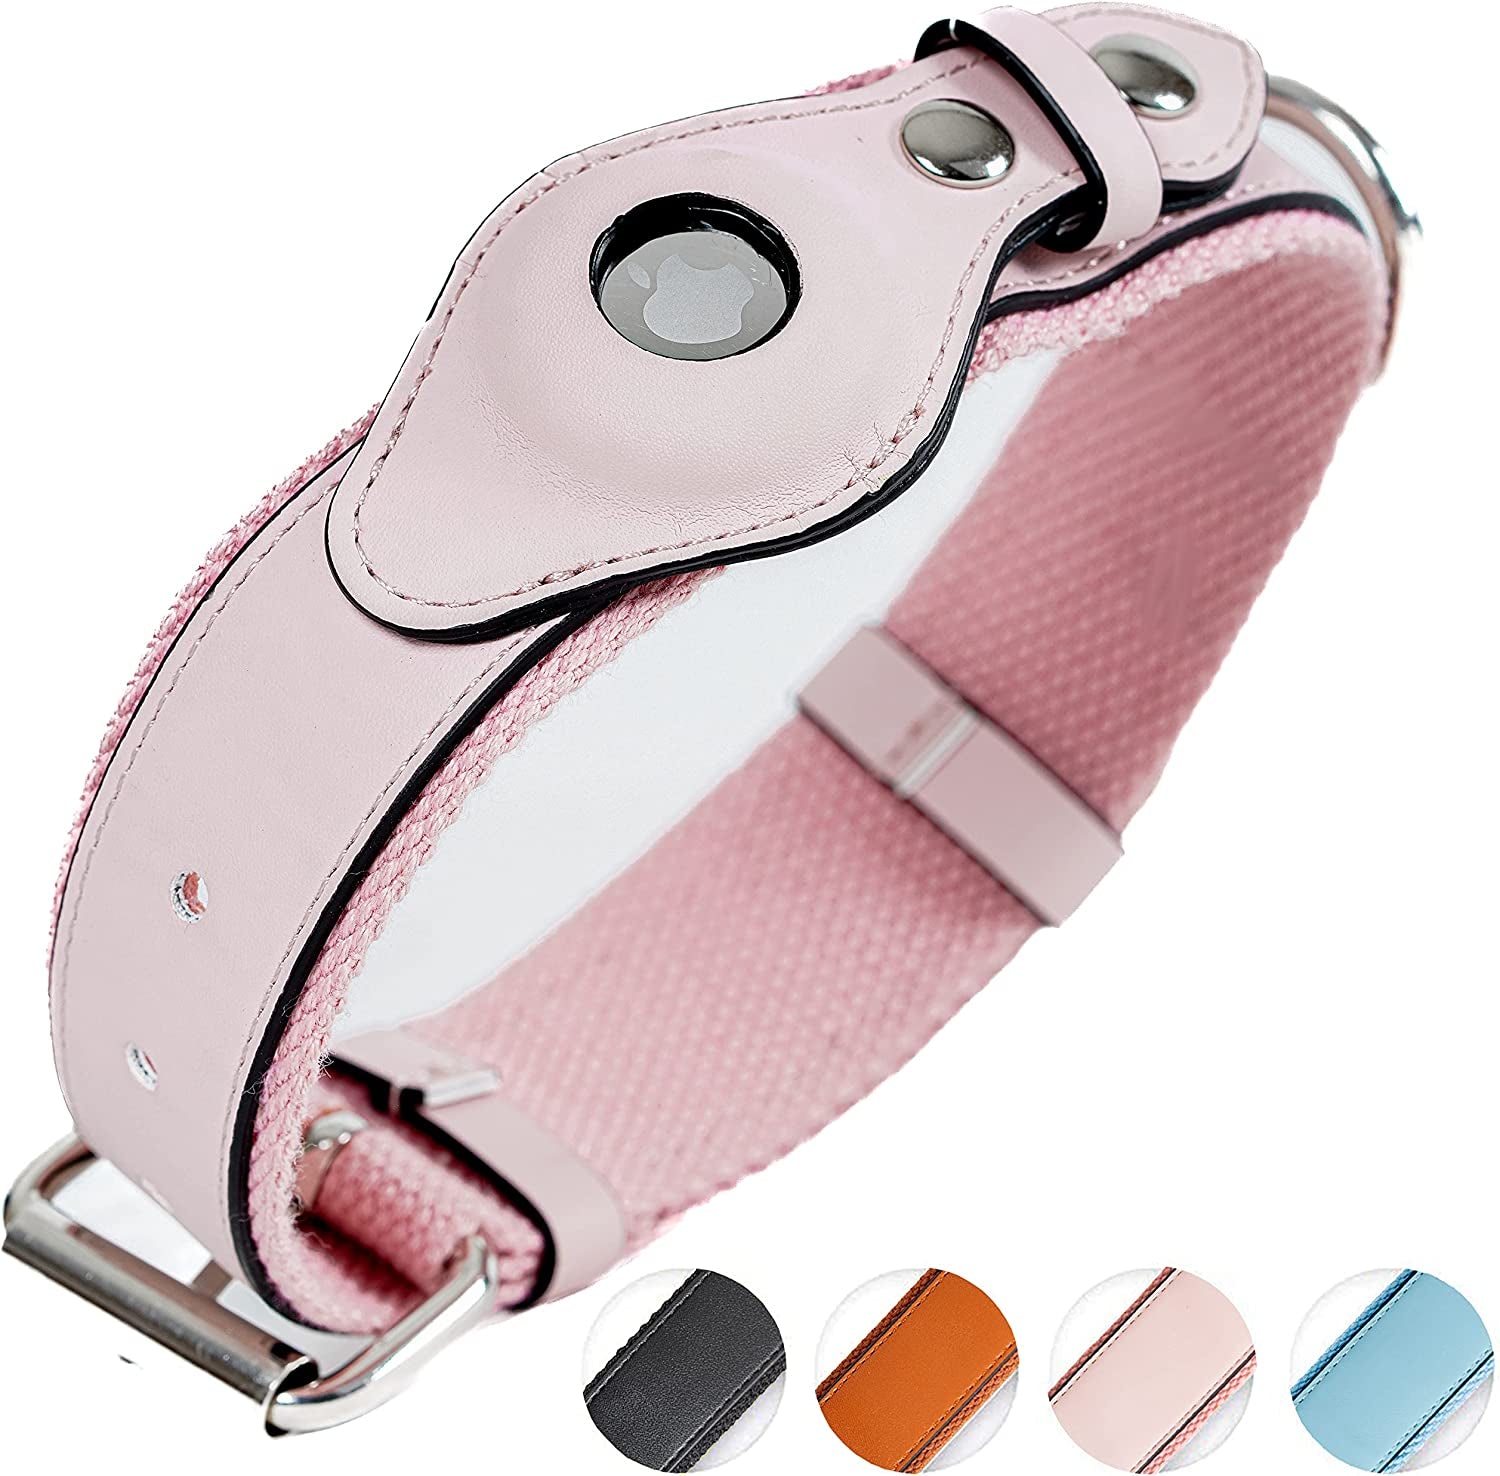 Safe Paws Airtag Dog Collar Holder - Our Adjustable Air Tag Dog Collar Holder Fits Small Medium and Large Dogs - Use Our Elegant PU Leather Dog Airtag Collar to Quickly Locate Your Dog Electronics > GPS Accessories > GPS Cases Safe Paws Pink Small 